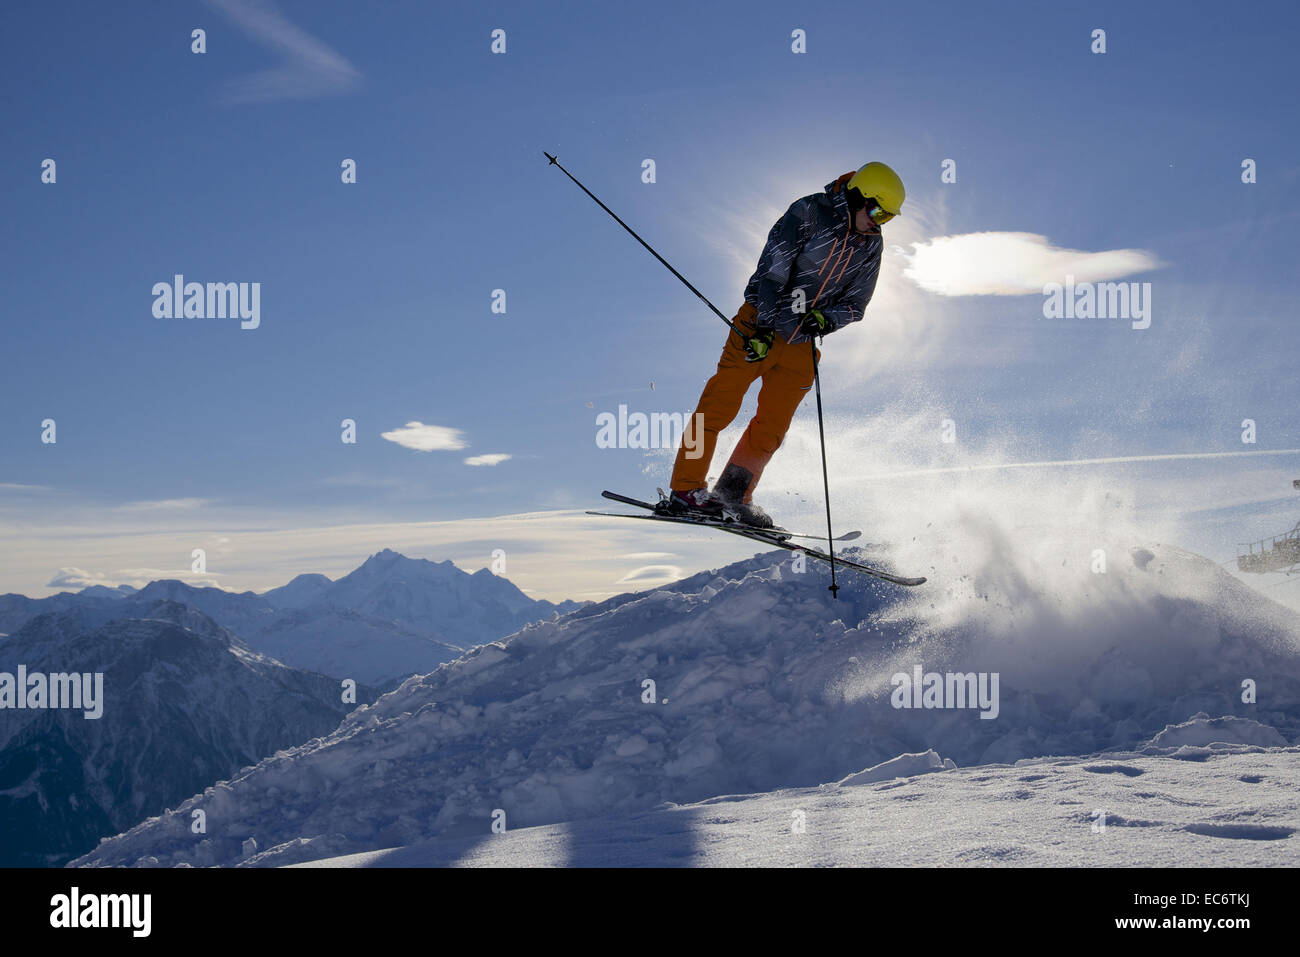 jumping freeskier in the mountains, silhouetted Stock Photo